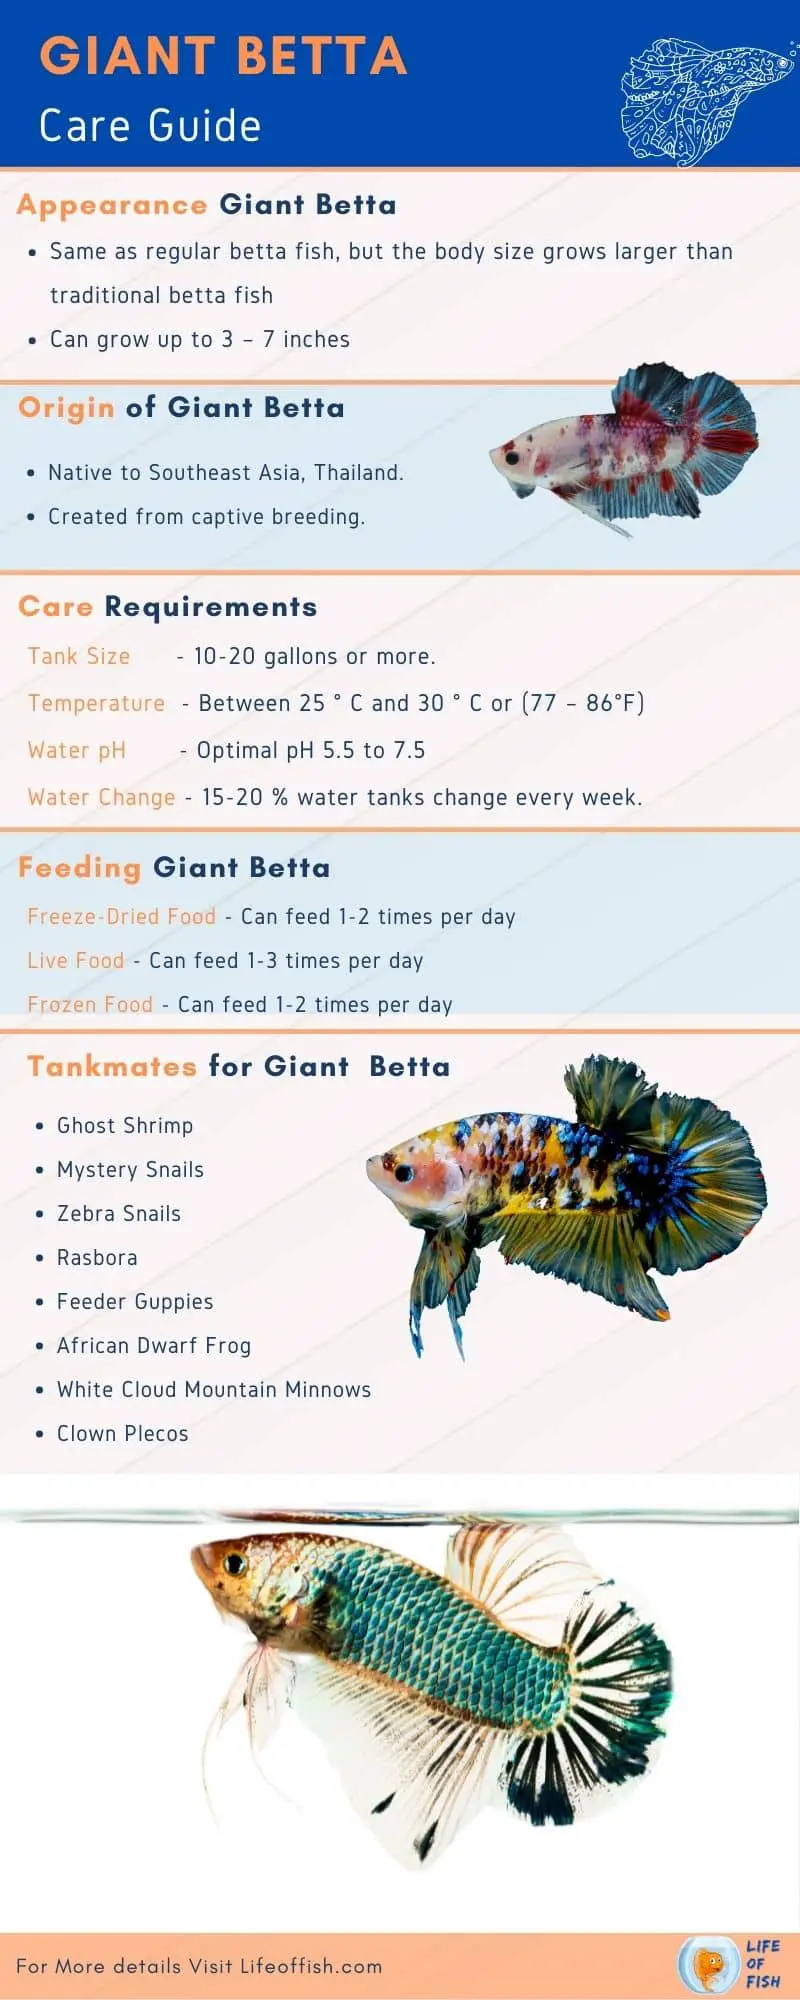 Giant Betta CARE infographic